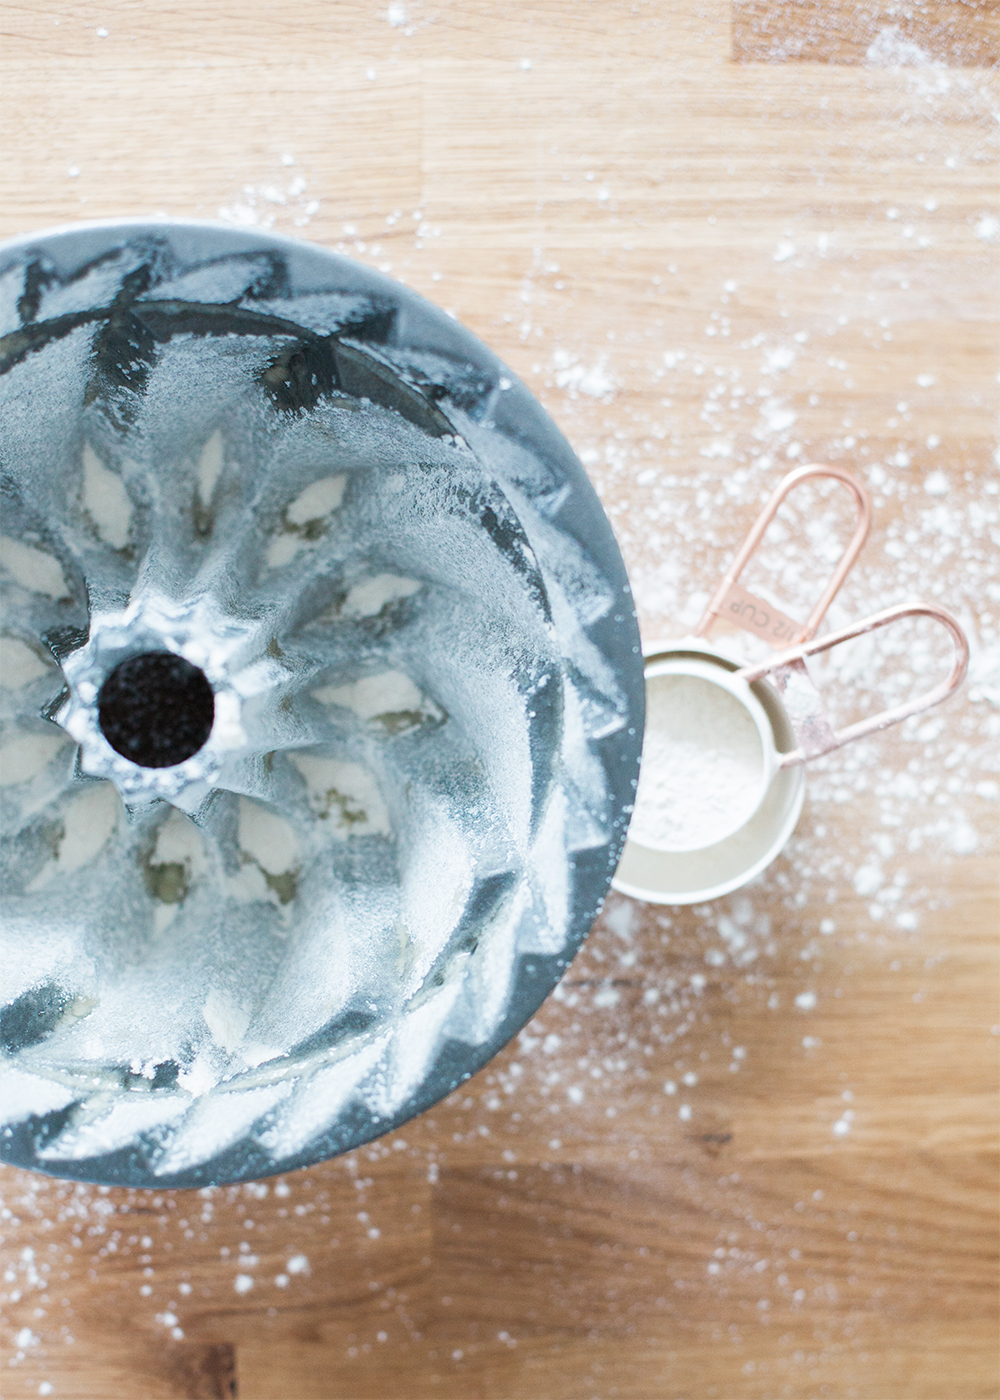 bundt cake mold dusted with flower